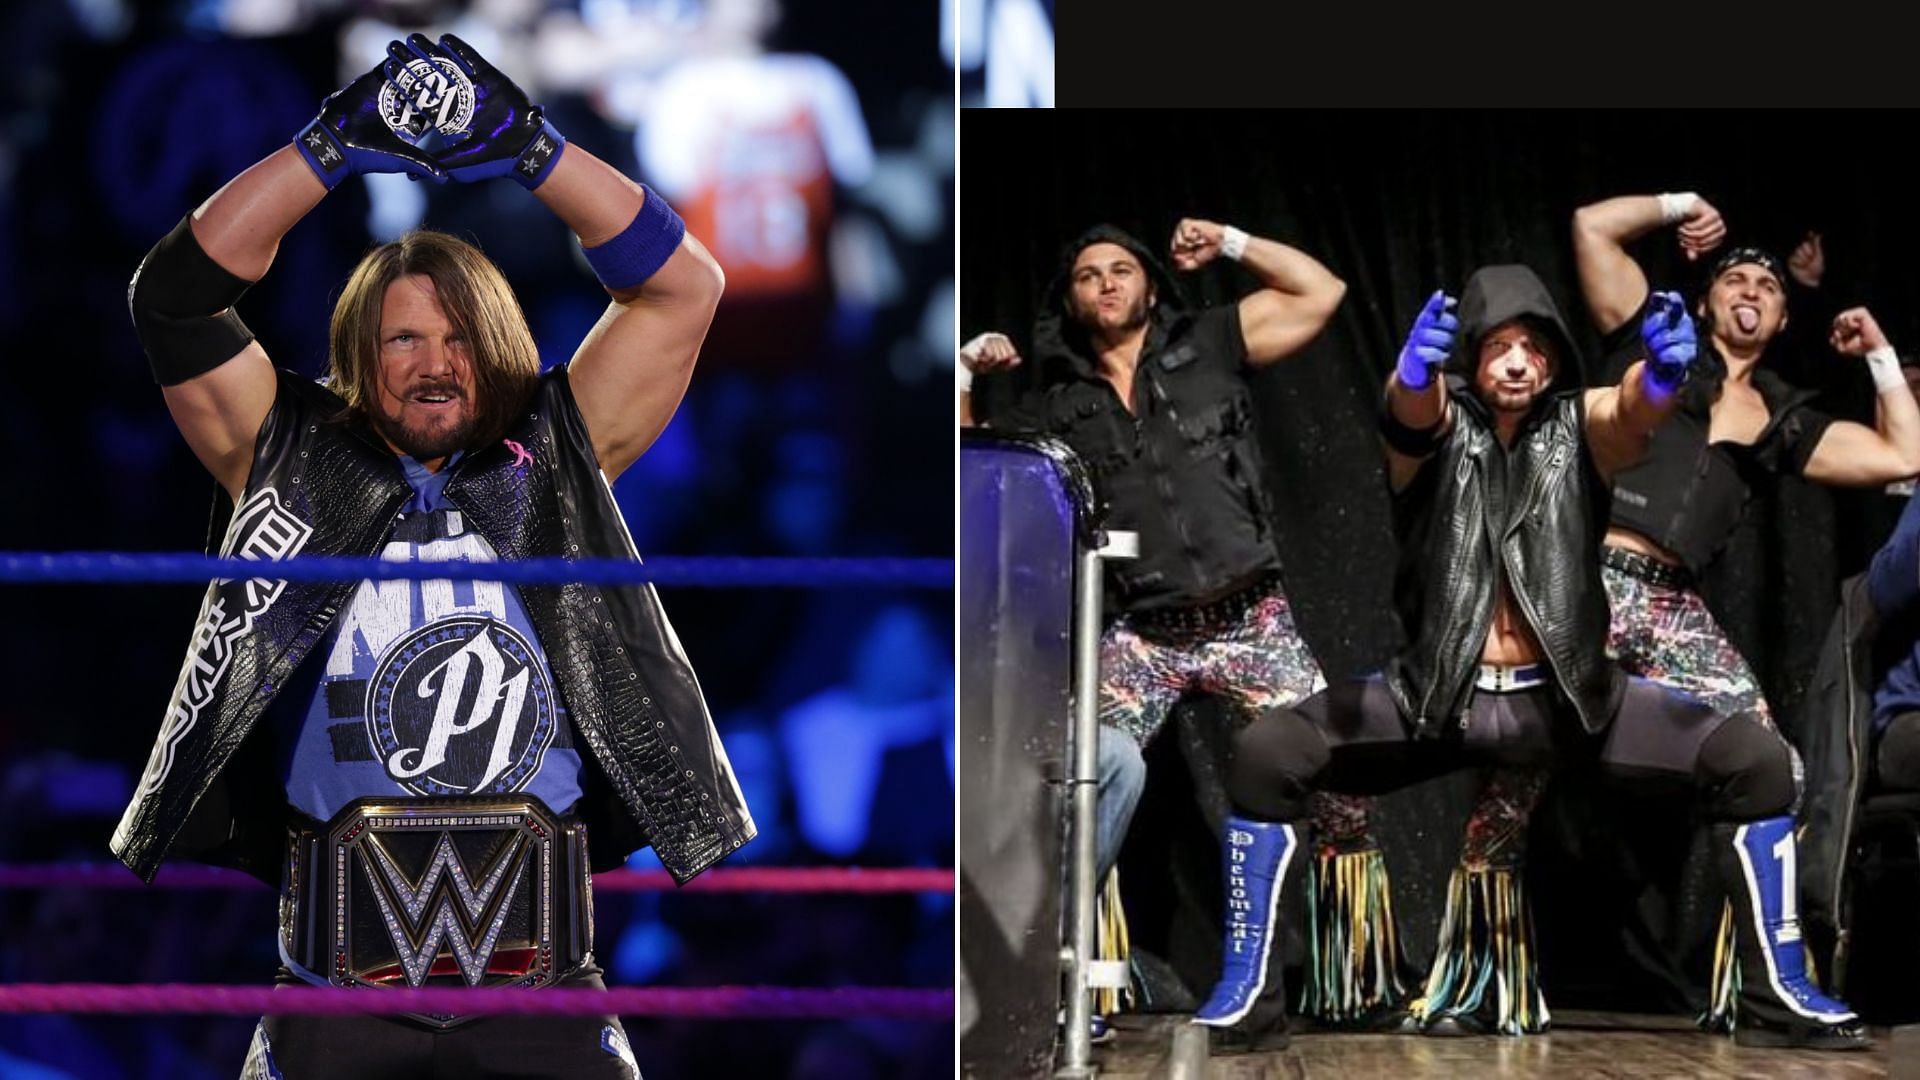 The Young Bucks respond to AJ Styles' invitation to WWE